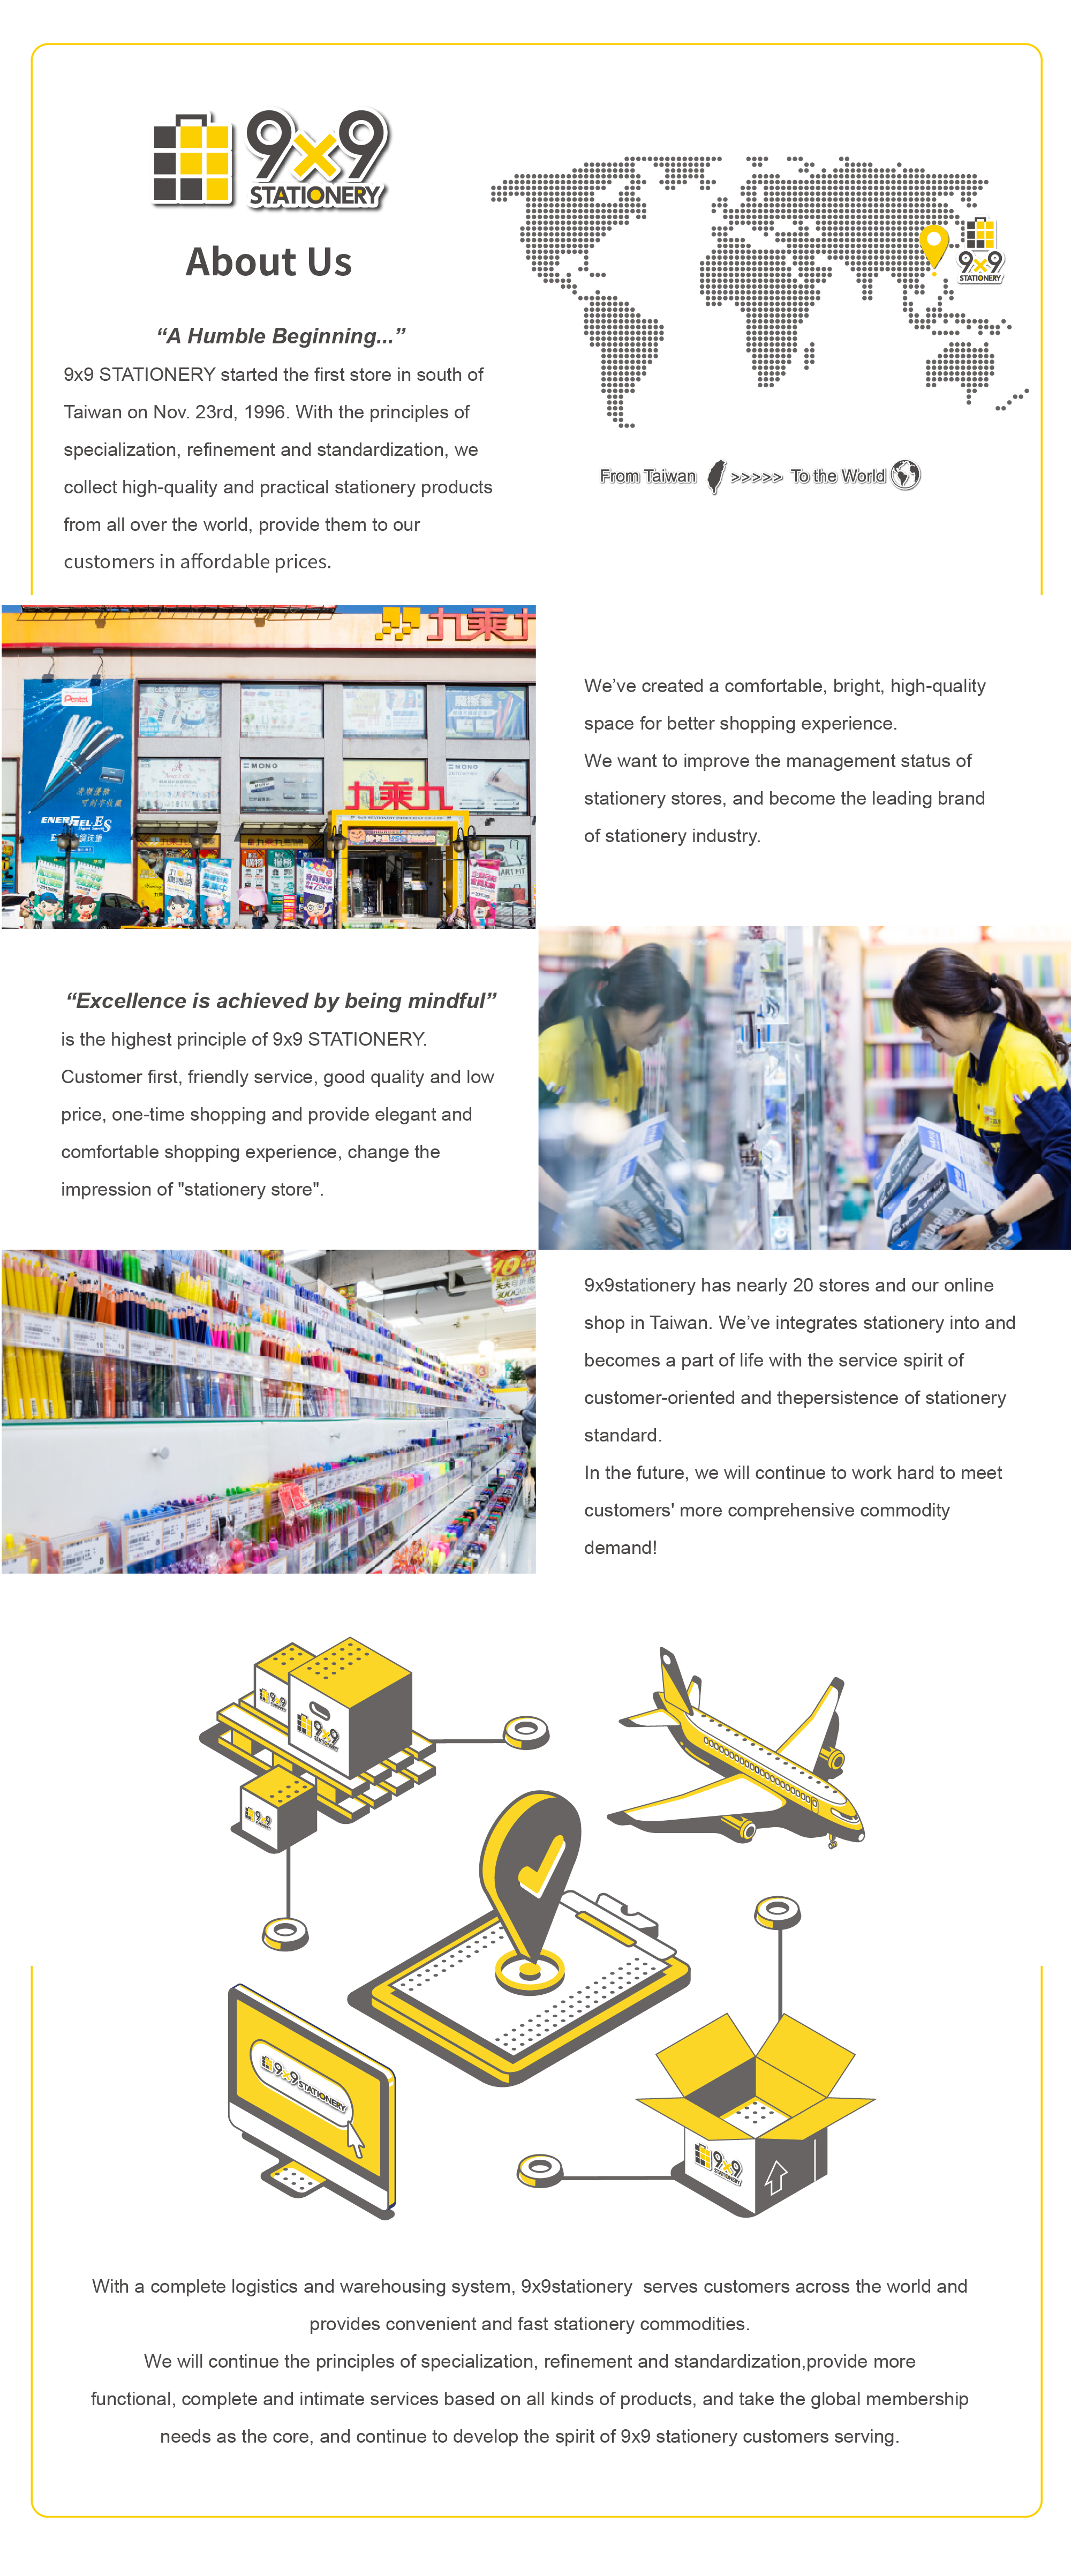 9x9stationery has 10,000 kinds of office supplies, stationery, cartoon stationery, literary handbooks, art supplies, household items and so on, with the best price, flexible pick-up, fast and convenient to meet your purchasing needs